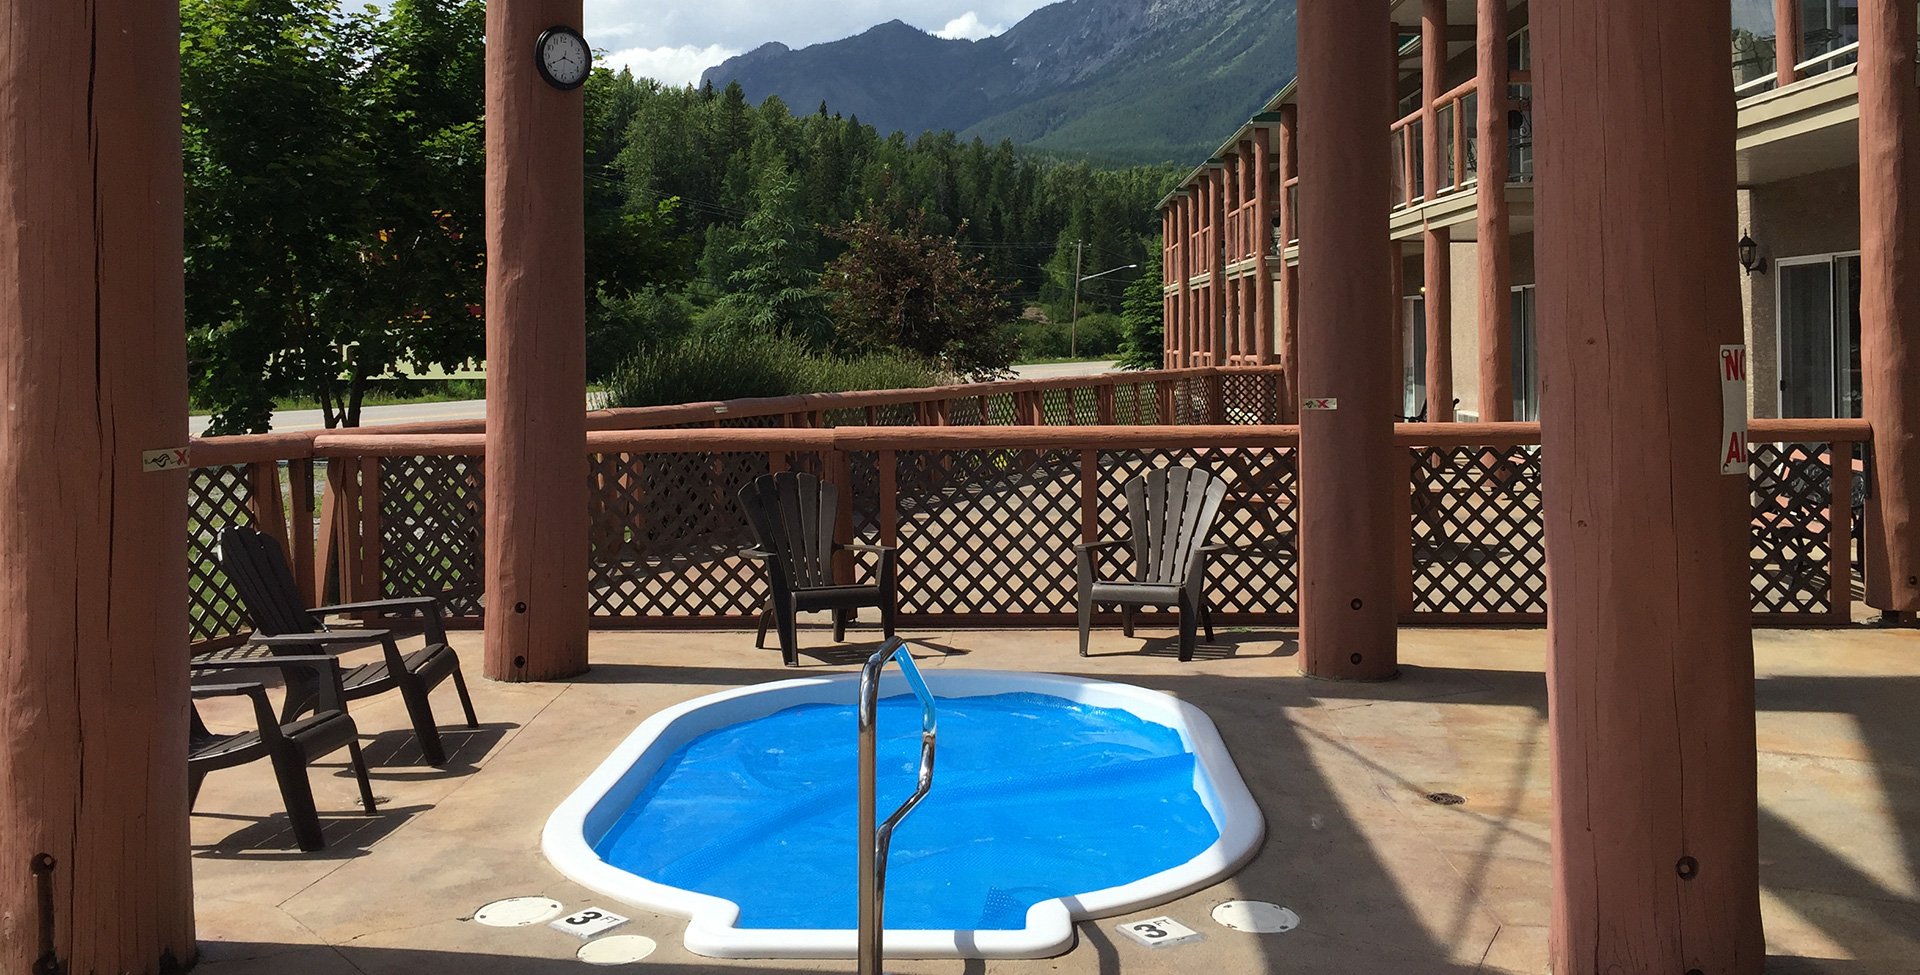 Four log posts surround the outdoor whirlpool area, at the Stanford Fernie Resort, featuring a round tub filled with crystal blue water, with four chocolate brown colored patio chairs placed around it.